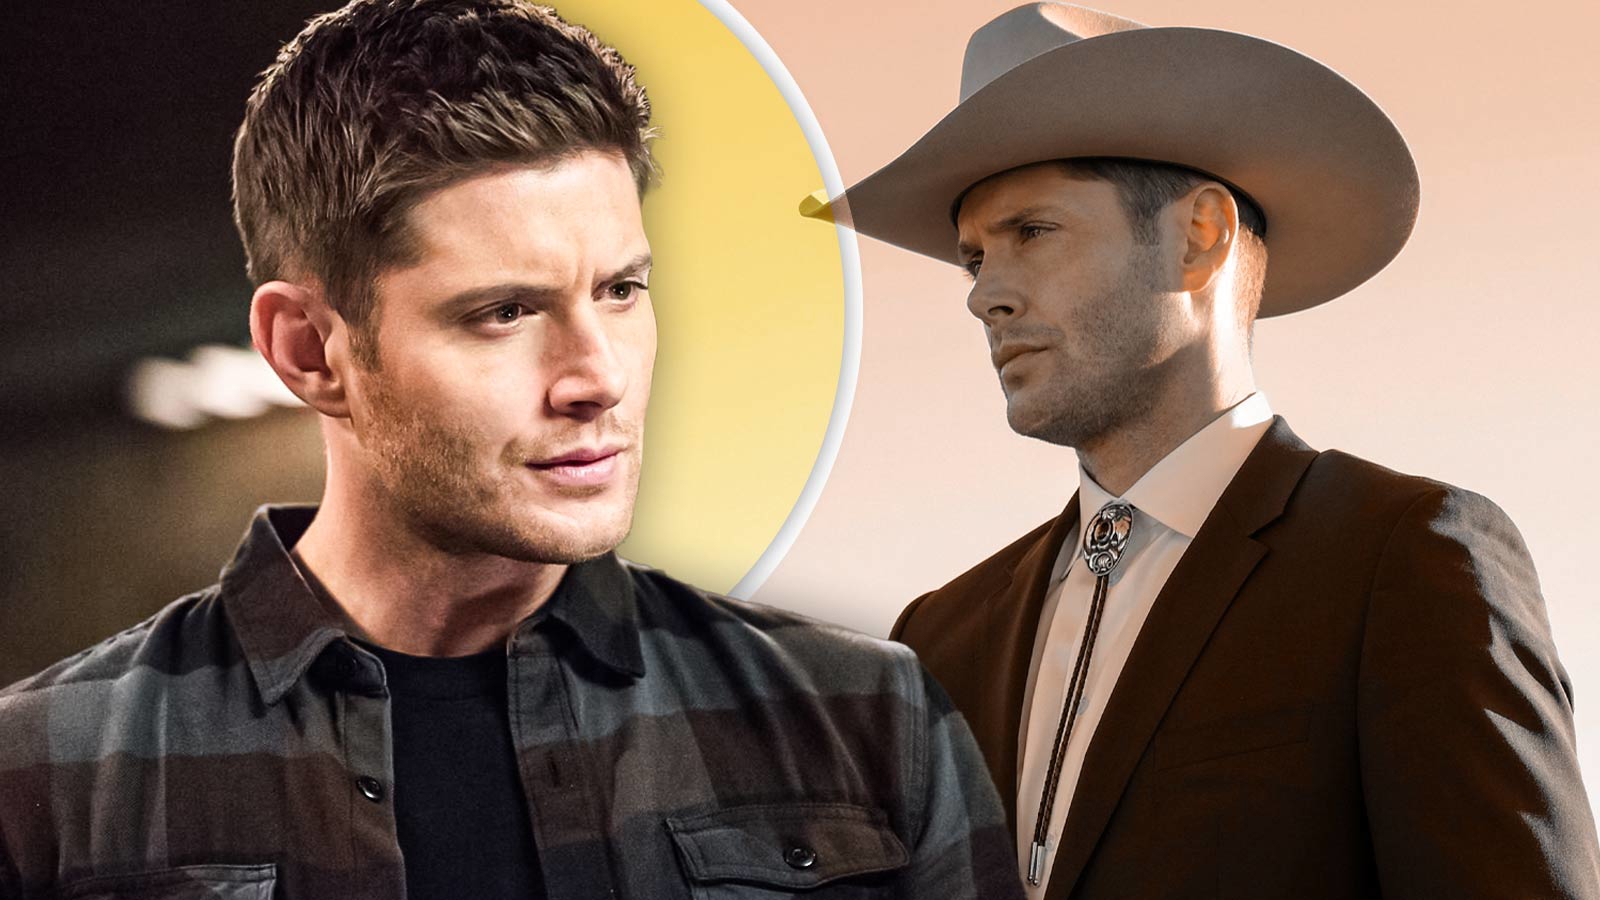 “It’s certainly shocking and jarring”: Jensen Ackles Was Traumatized By ‘Rust’ Accident After it Could Have Easily Ruined His Career